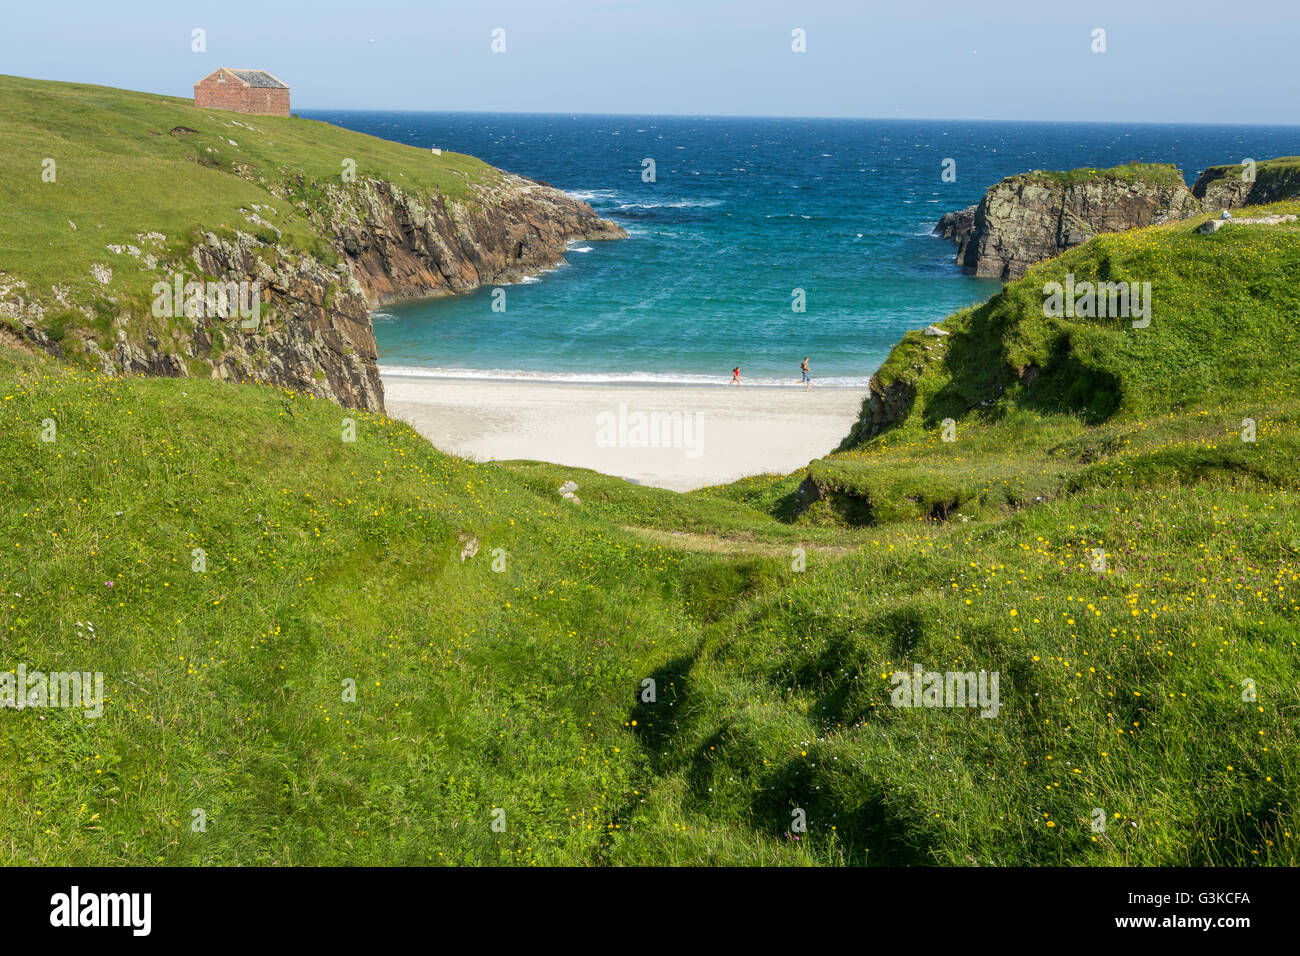 View of beautiful bay and people running along thel beach on a sunny day, Isle of Lewis, Outer Hebrides, Scotland, UK Stock Photo